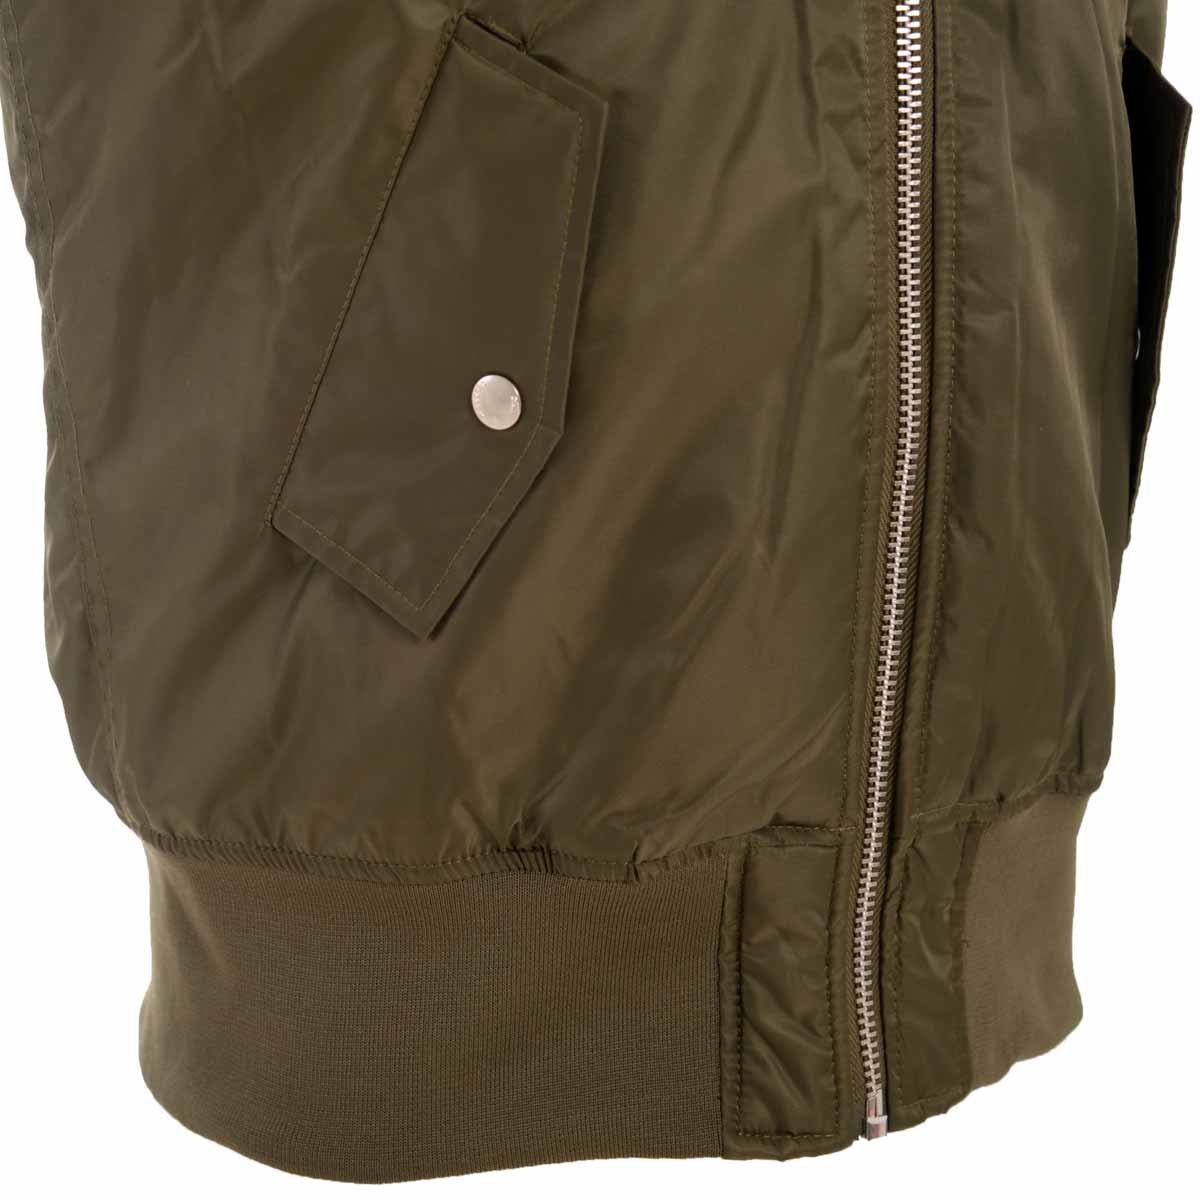 Chaleco Nylon Militar Members Only